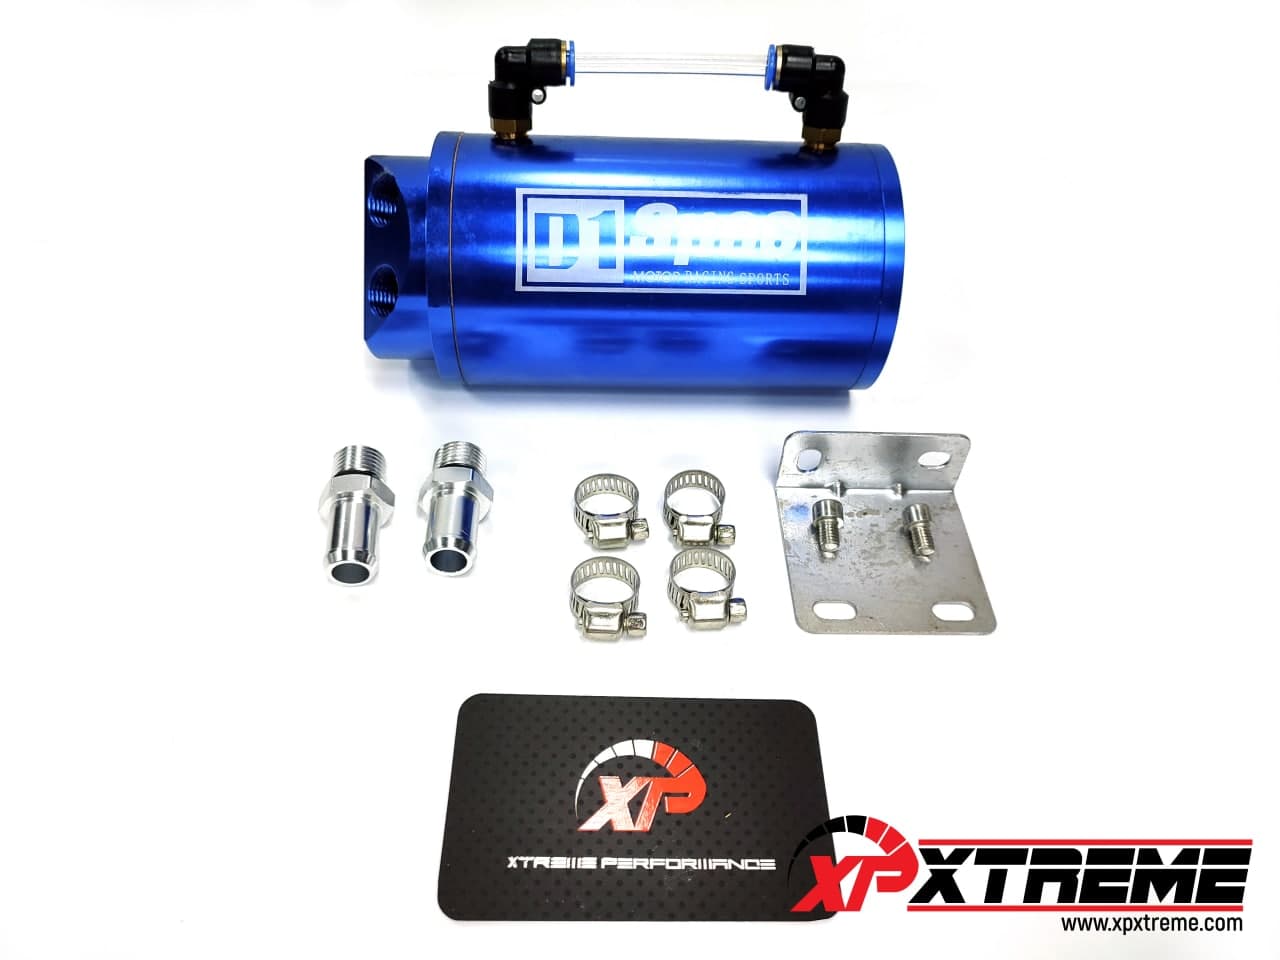 OIL CATCH TANK D1 ROUND BLUE FITTING 14MM - Xtreme Performance